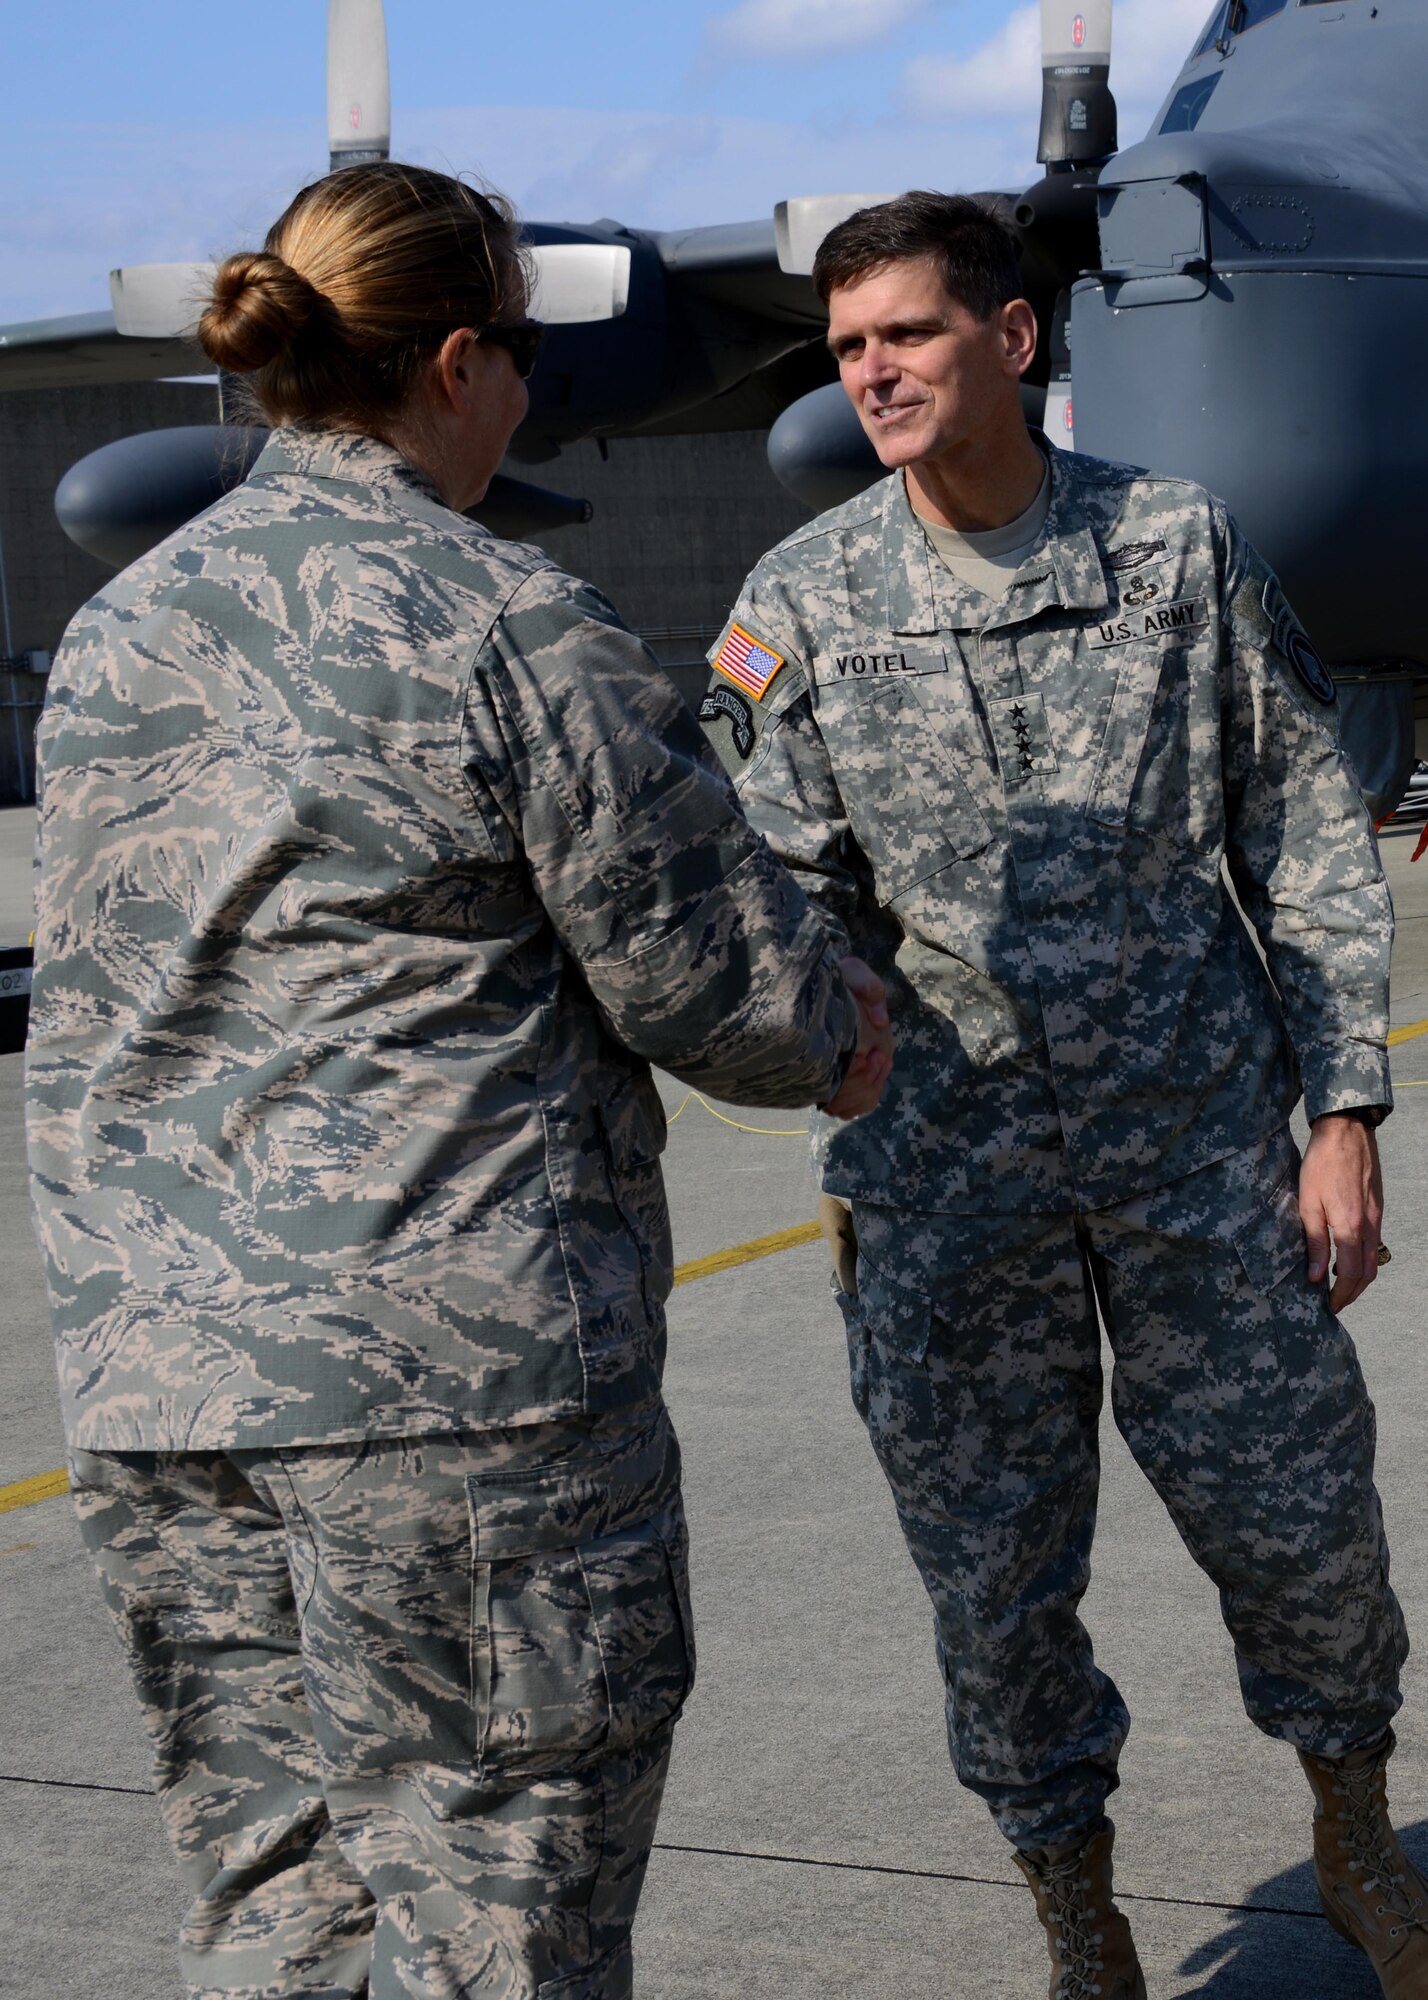 U.S. Army Gen.  Joseph Votel, commander of U.S. Special Operations Command shakes hands with Lt. Col. Sarah Emory, commander of the 353rd Special Operations Maintenance Squadron, after touring the flightline Dec. 15, 2014 on Kadena Air Base, Japan.  Votel directs all U.S. Special Operations Forces and is in charge of organizing, training, equipping and deploying special operators such as the Air Commandos of the 353rd Special Operations Group. (U.S. Air Force photo by Tech. Sgt. Kristine Dreyer) 